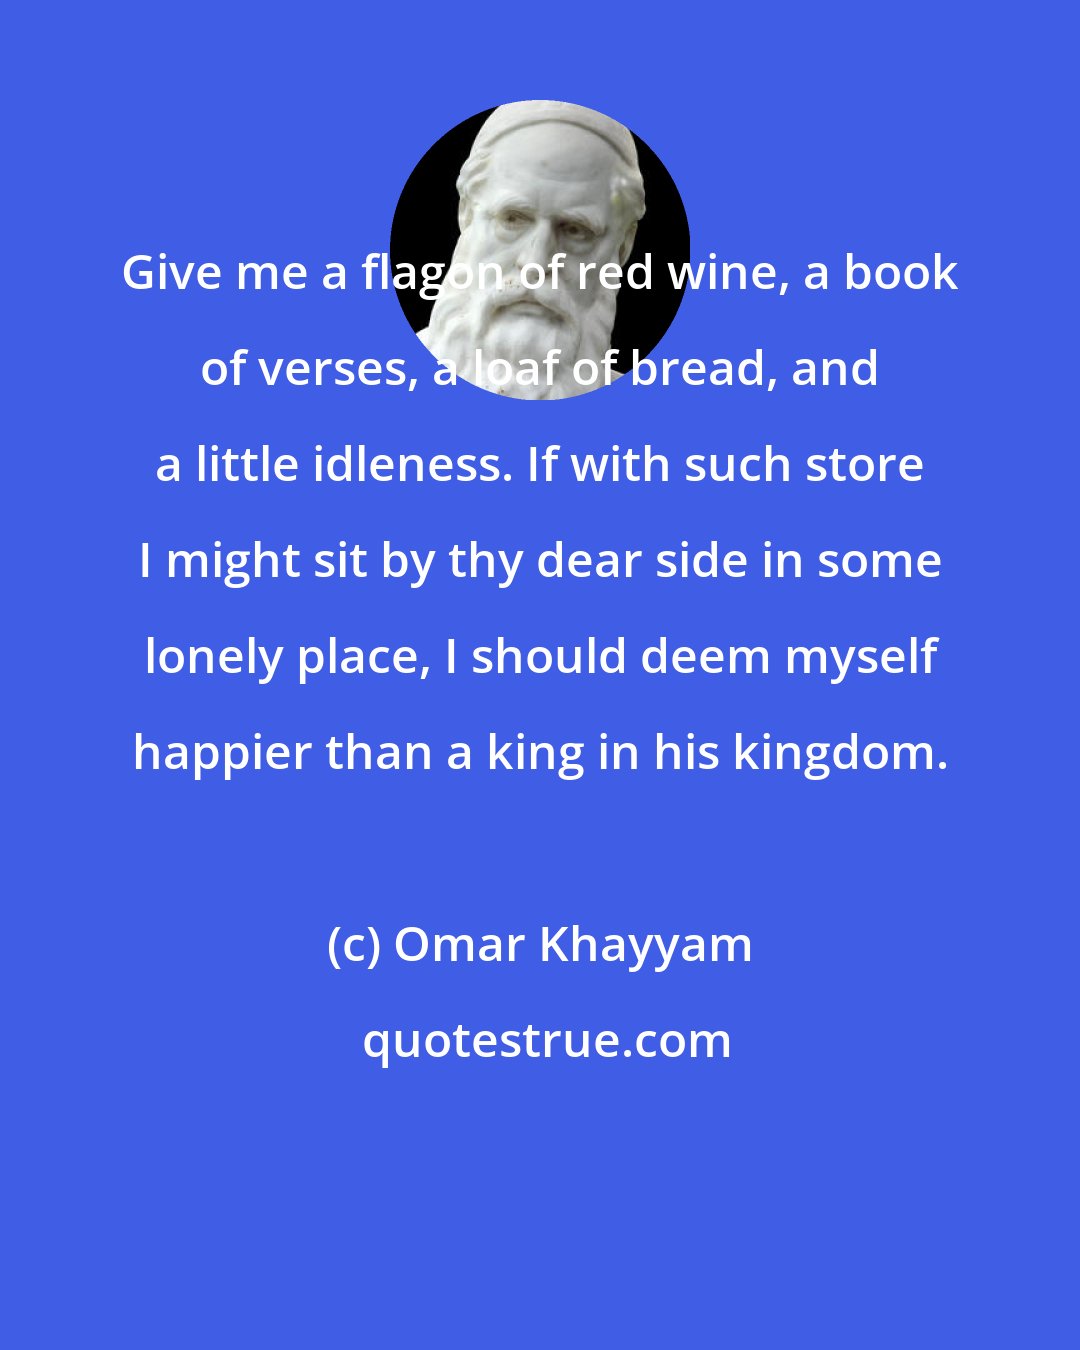 Omar Khayyam: Give me a flagon of red wine, a book of verses, a loaf of bread, and a little idleness. If with such store I might sit by thy dear side in some lonely place, I should deem myself happier than a king in his kingdom.